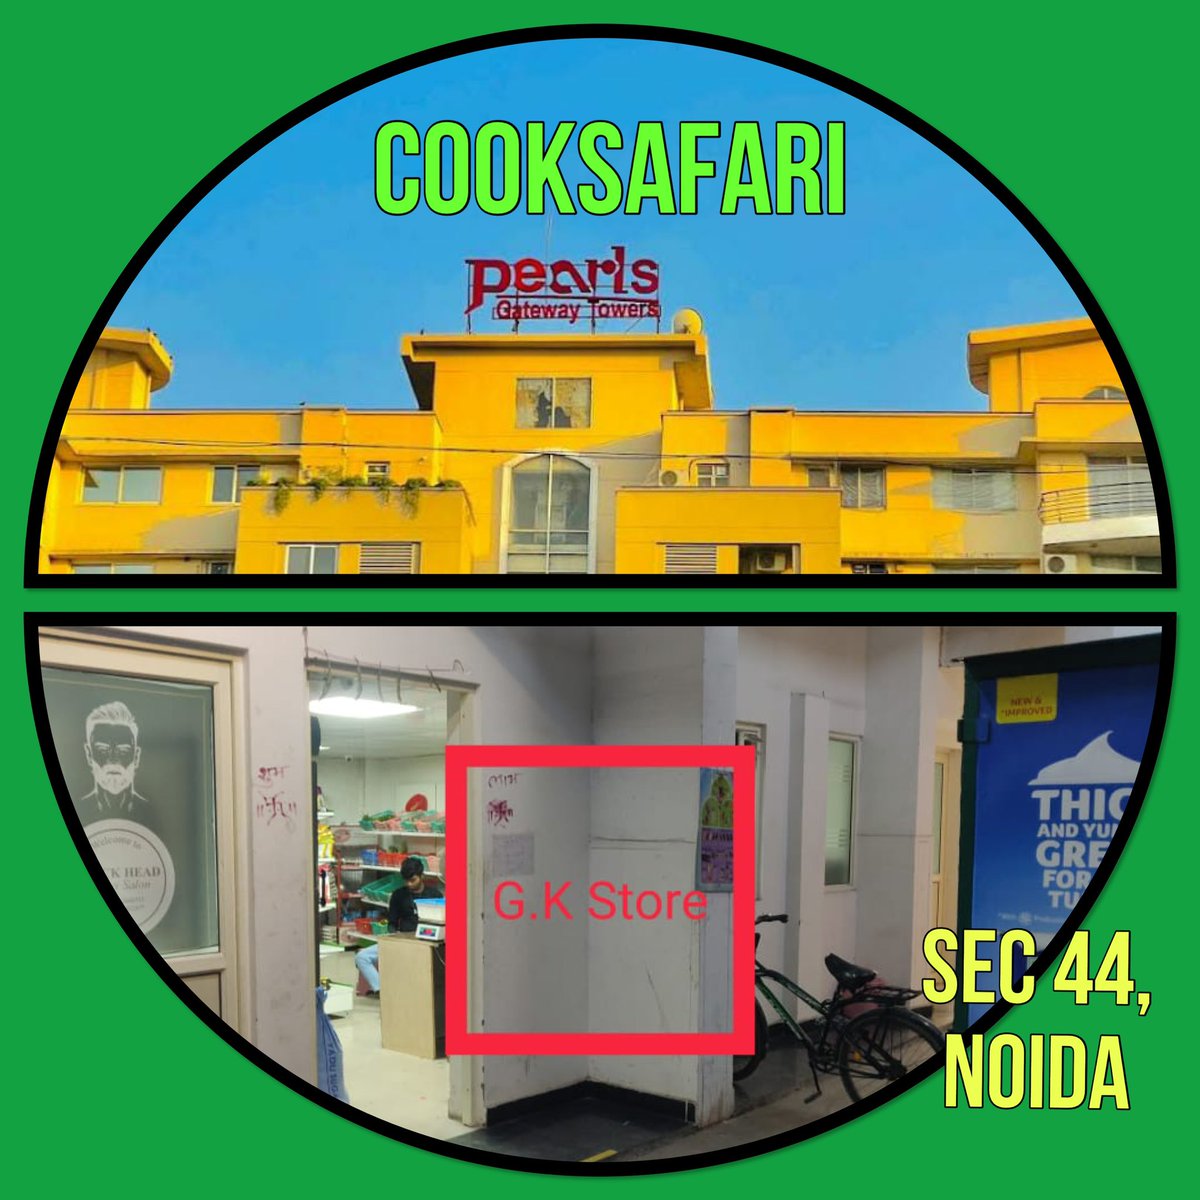 We are available in GK Store, Sec 44, Noida 

Cooksafari: your cooking partner ensures hassle free cooking experience 

Cook fresh with Cooksafari 

#cooksafari #readytocook #readytoeat #hasslefree #cookingpartner #cookfresh #freshcooking